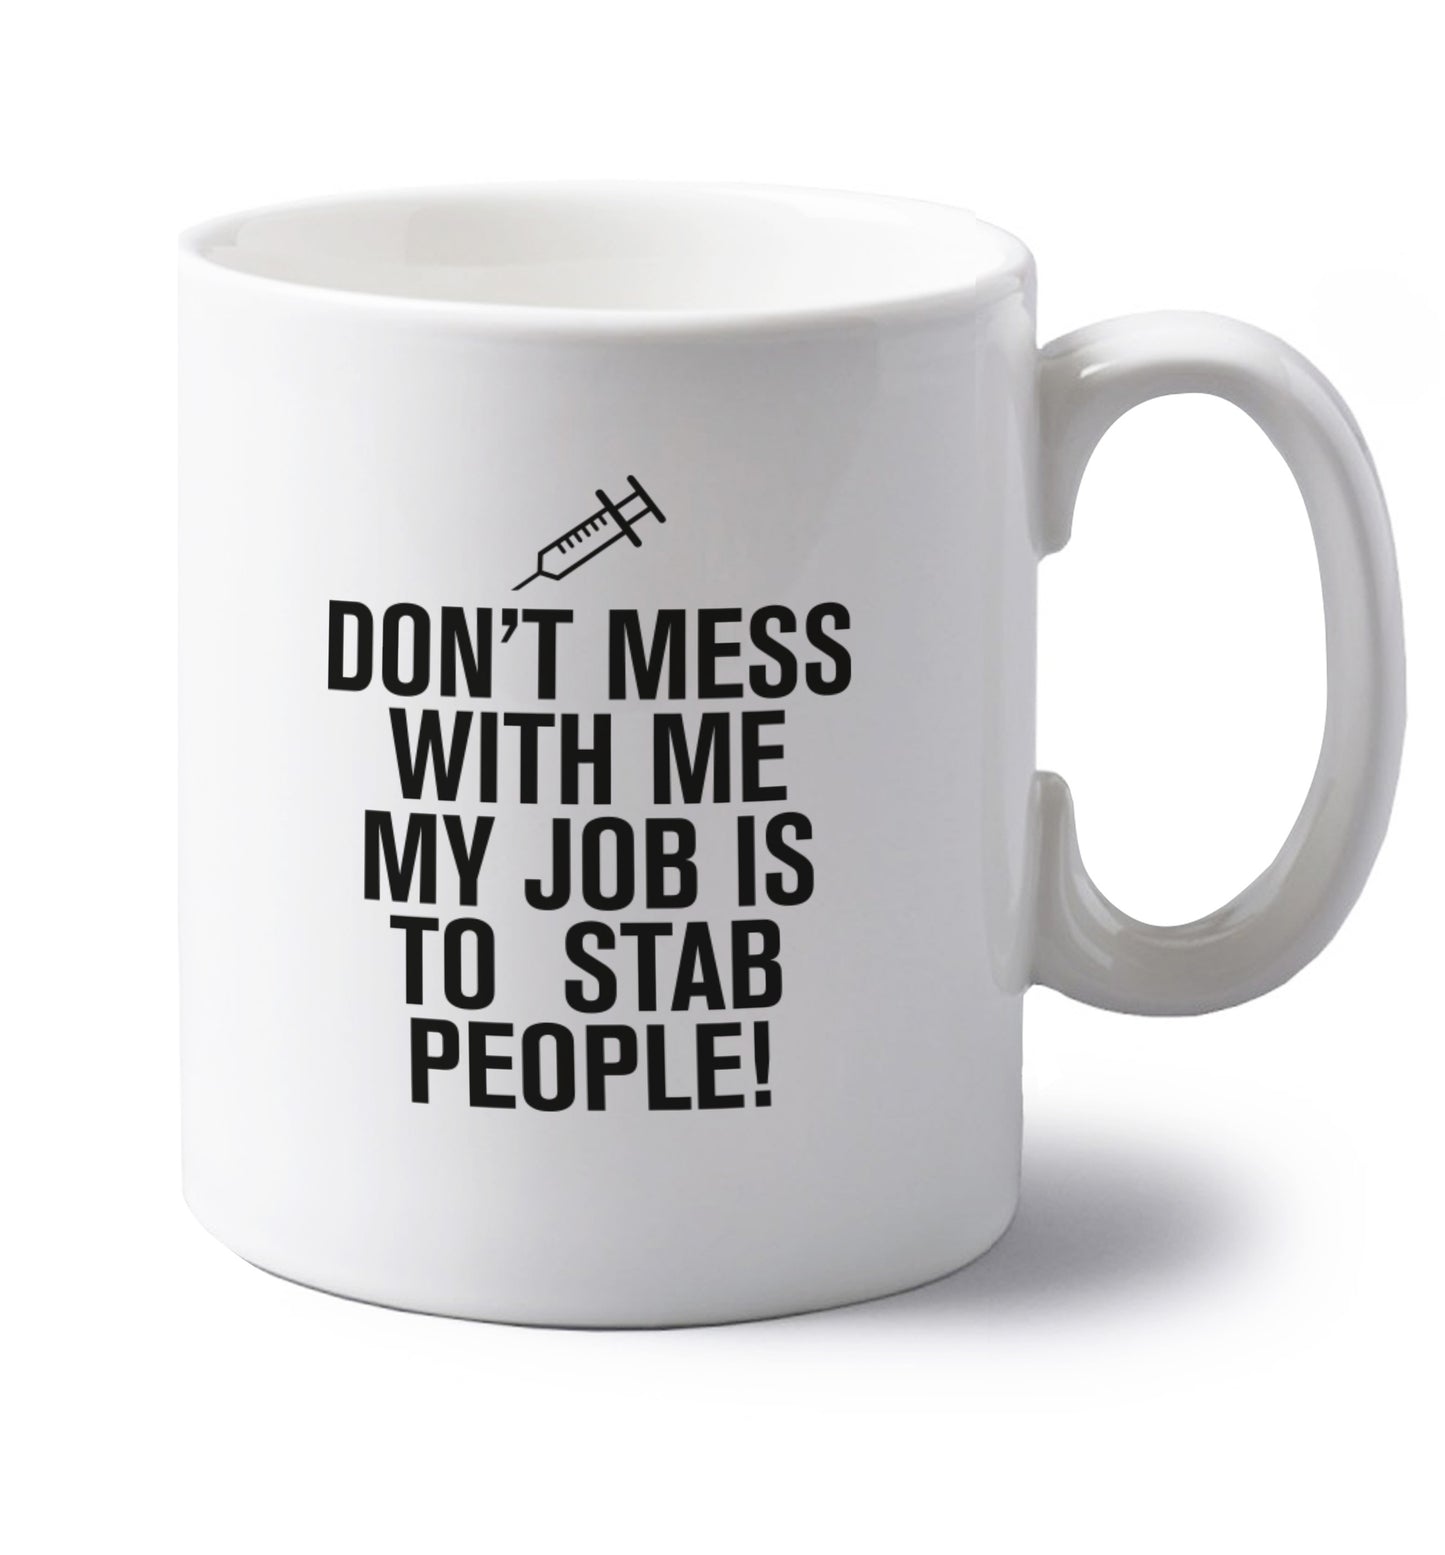 Don't mess with me my job is to stab people! left handed white ceramic mug 